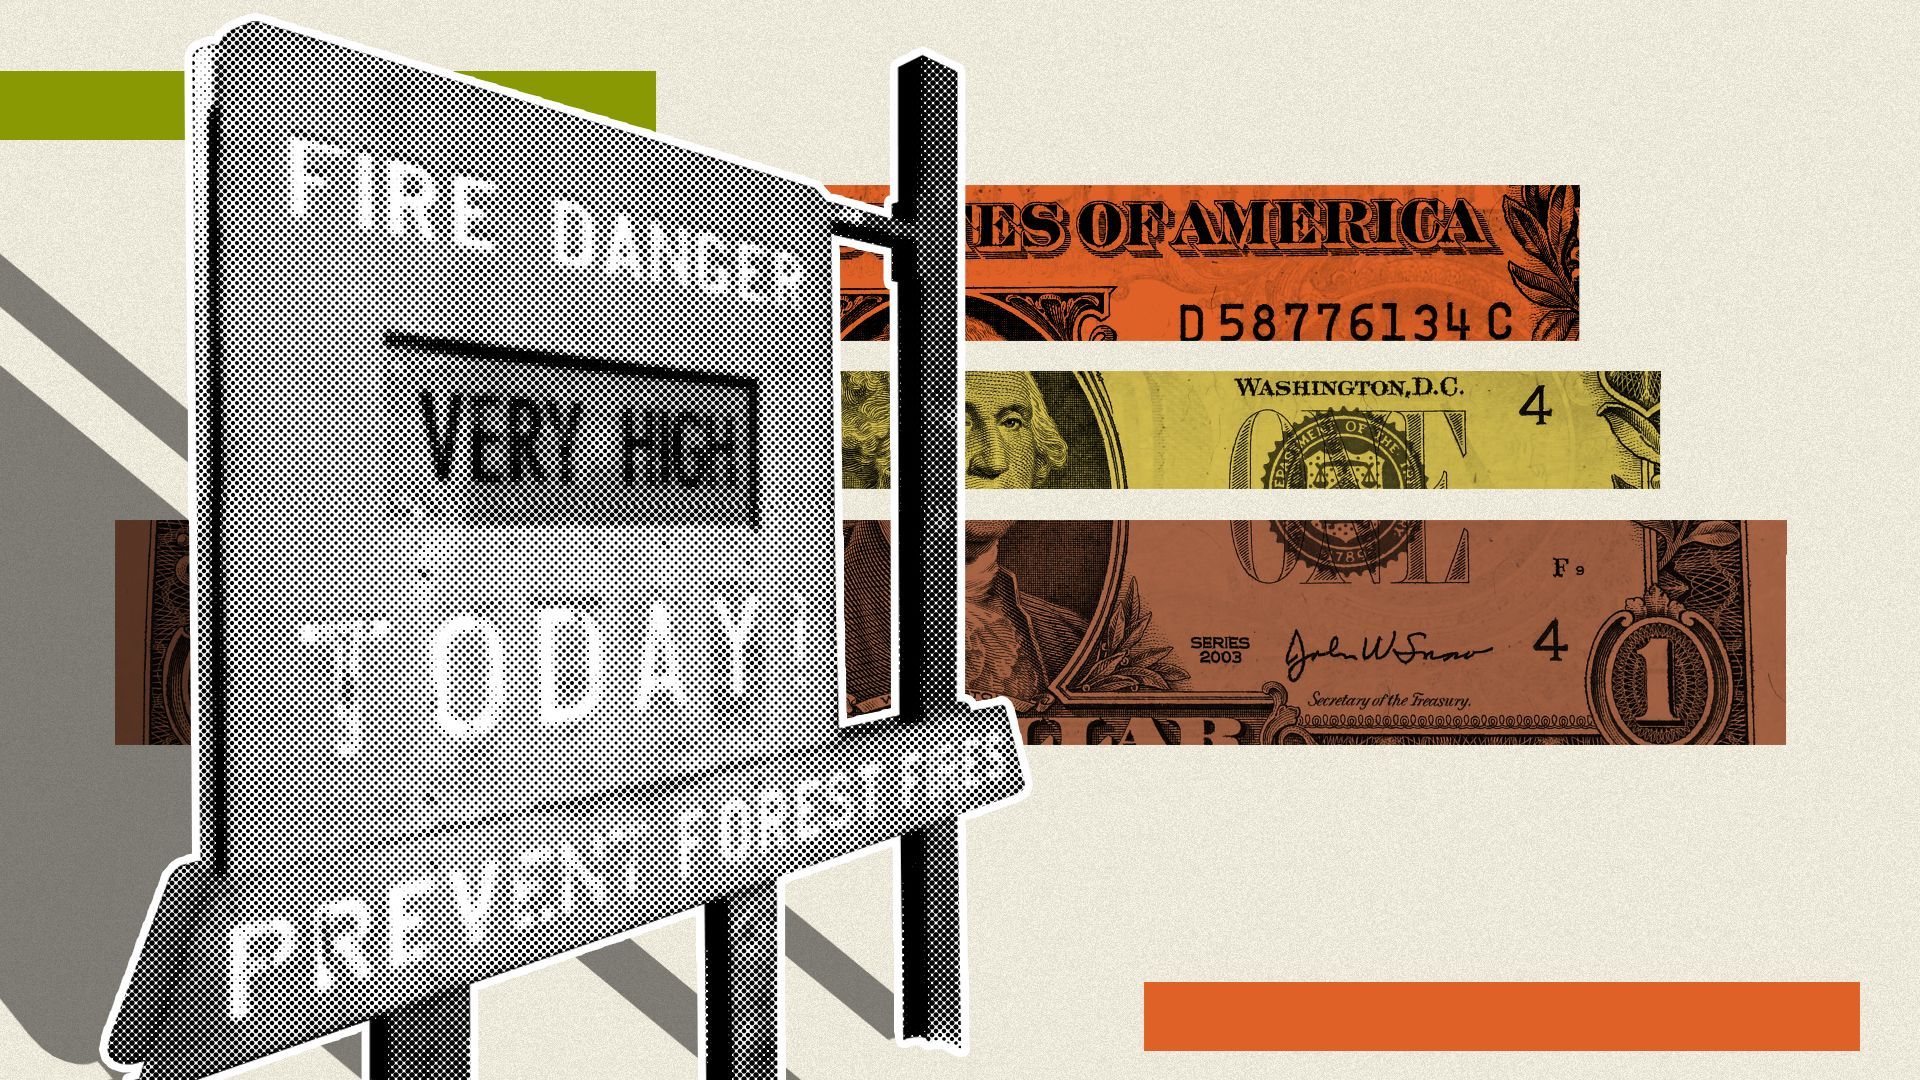 Illustration of a fire danger sign reading "very high" in front of cut-outs of a one dollar bill and graphic shapes.